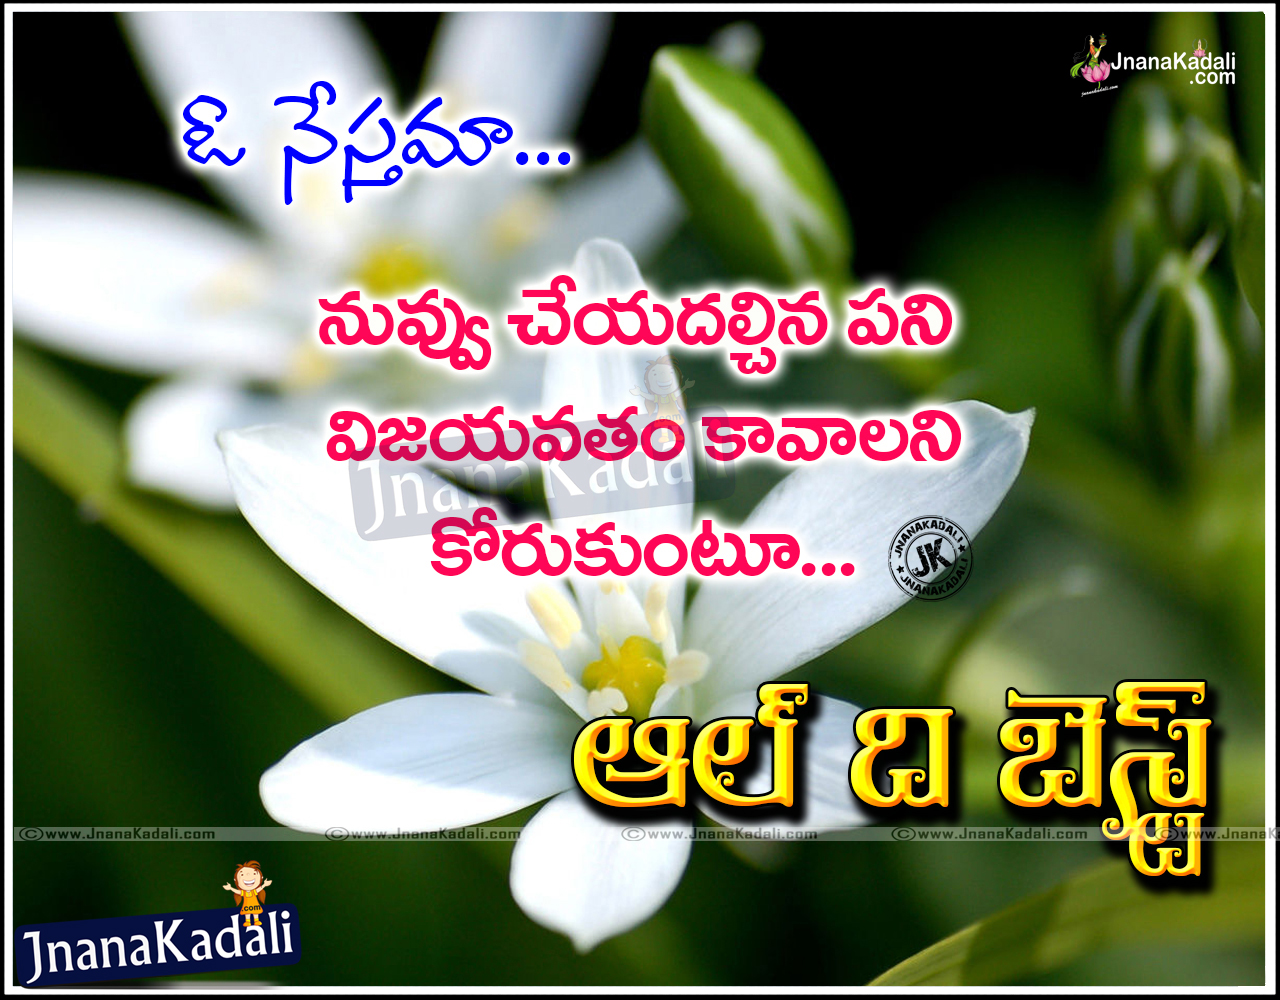 All The Best Quotations for Your Boss in Telugu Language Top inspiring All The Best